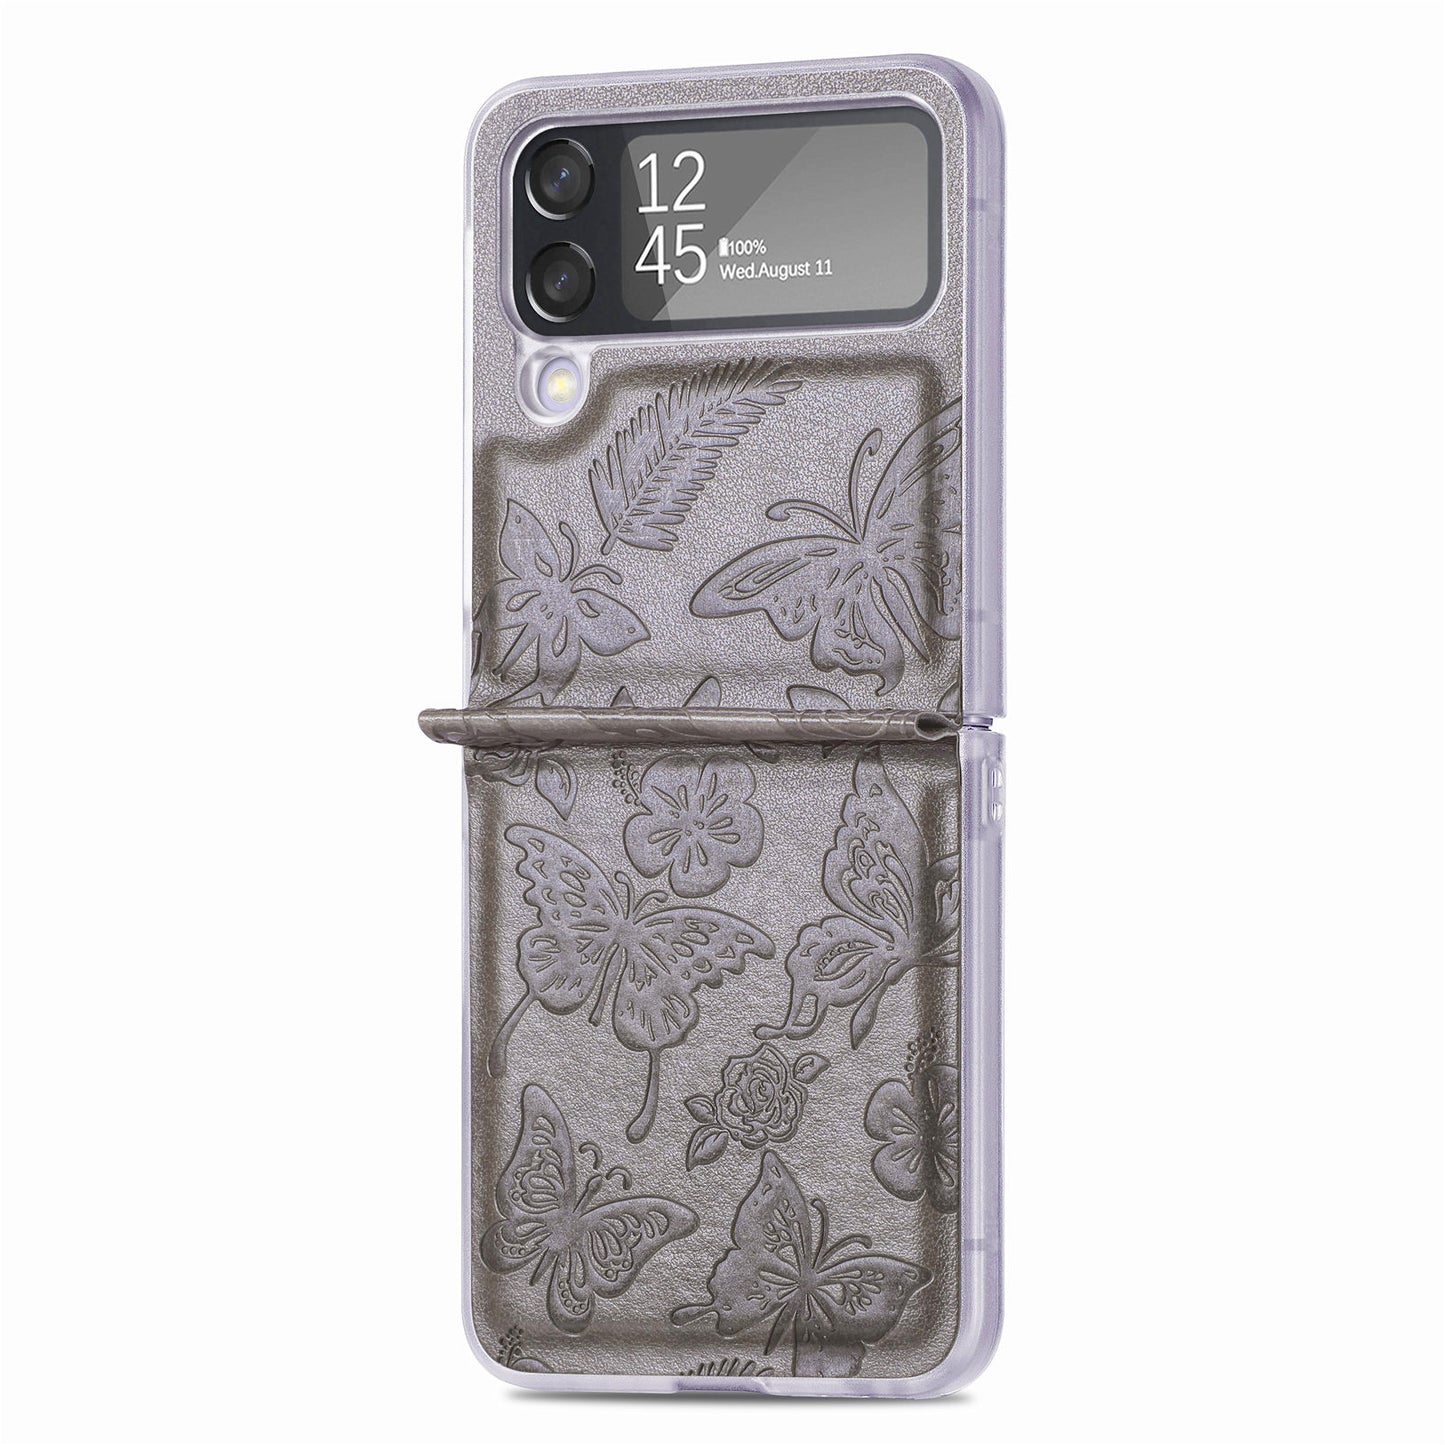 Lovely Butterfly Siamese PU Full Cover, Transparent PC Upper And Lower Protective Case, Phone Case